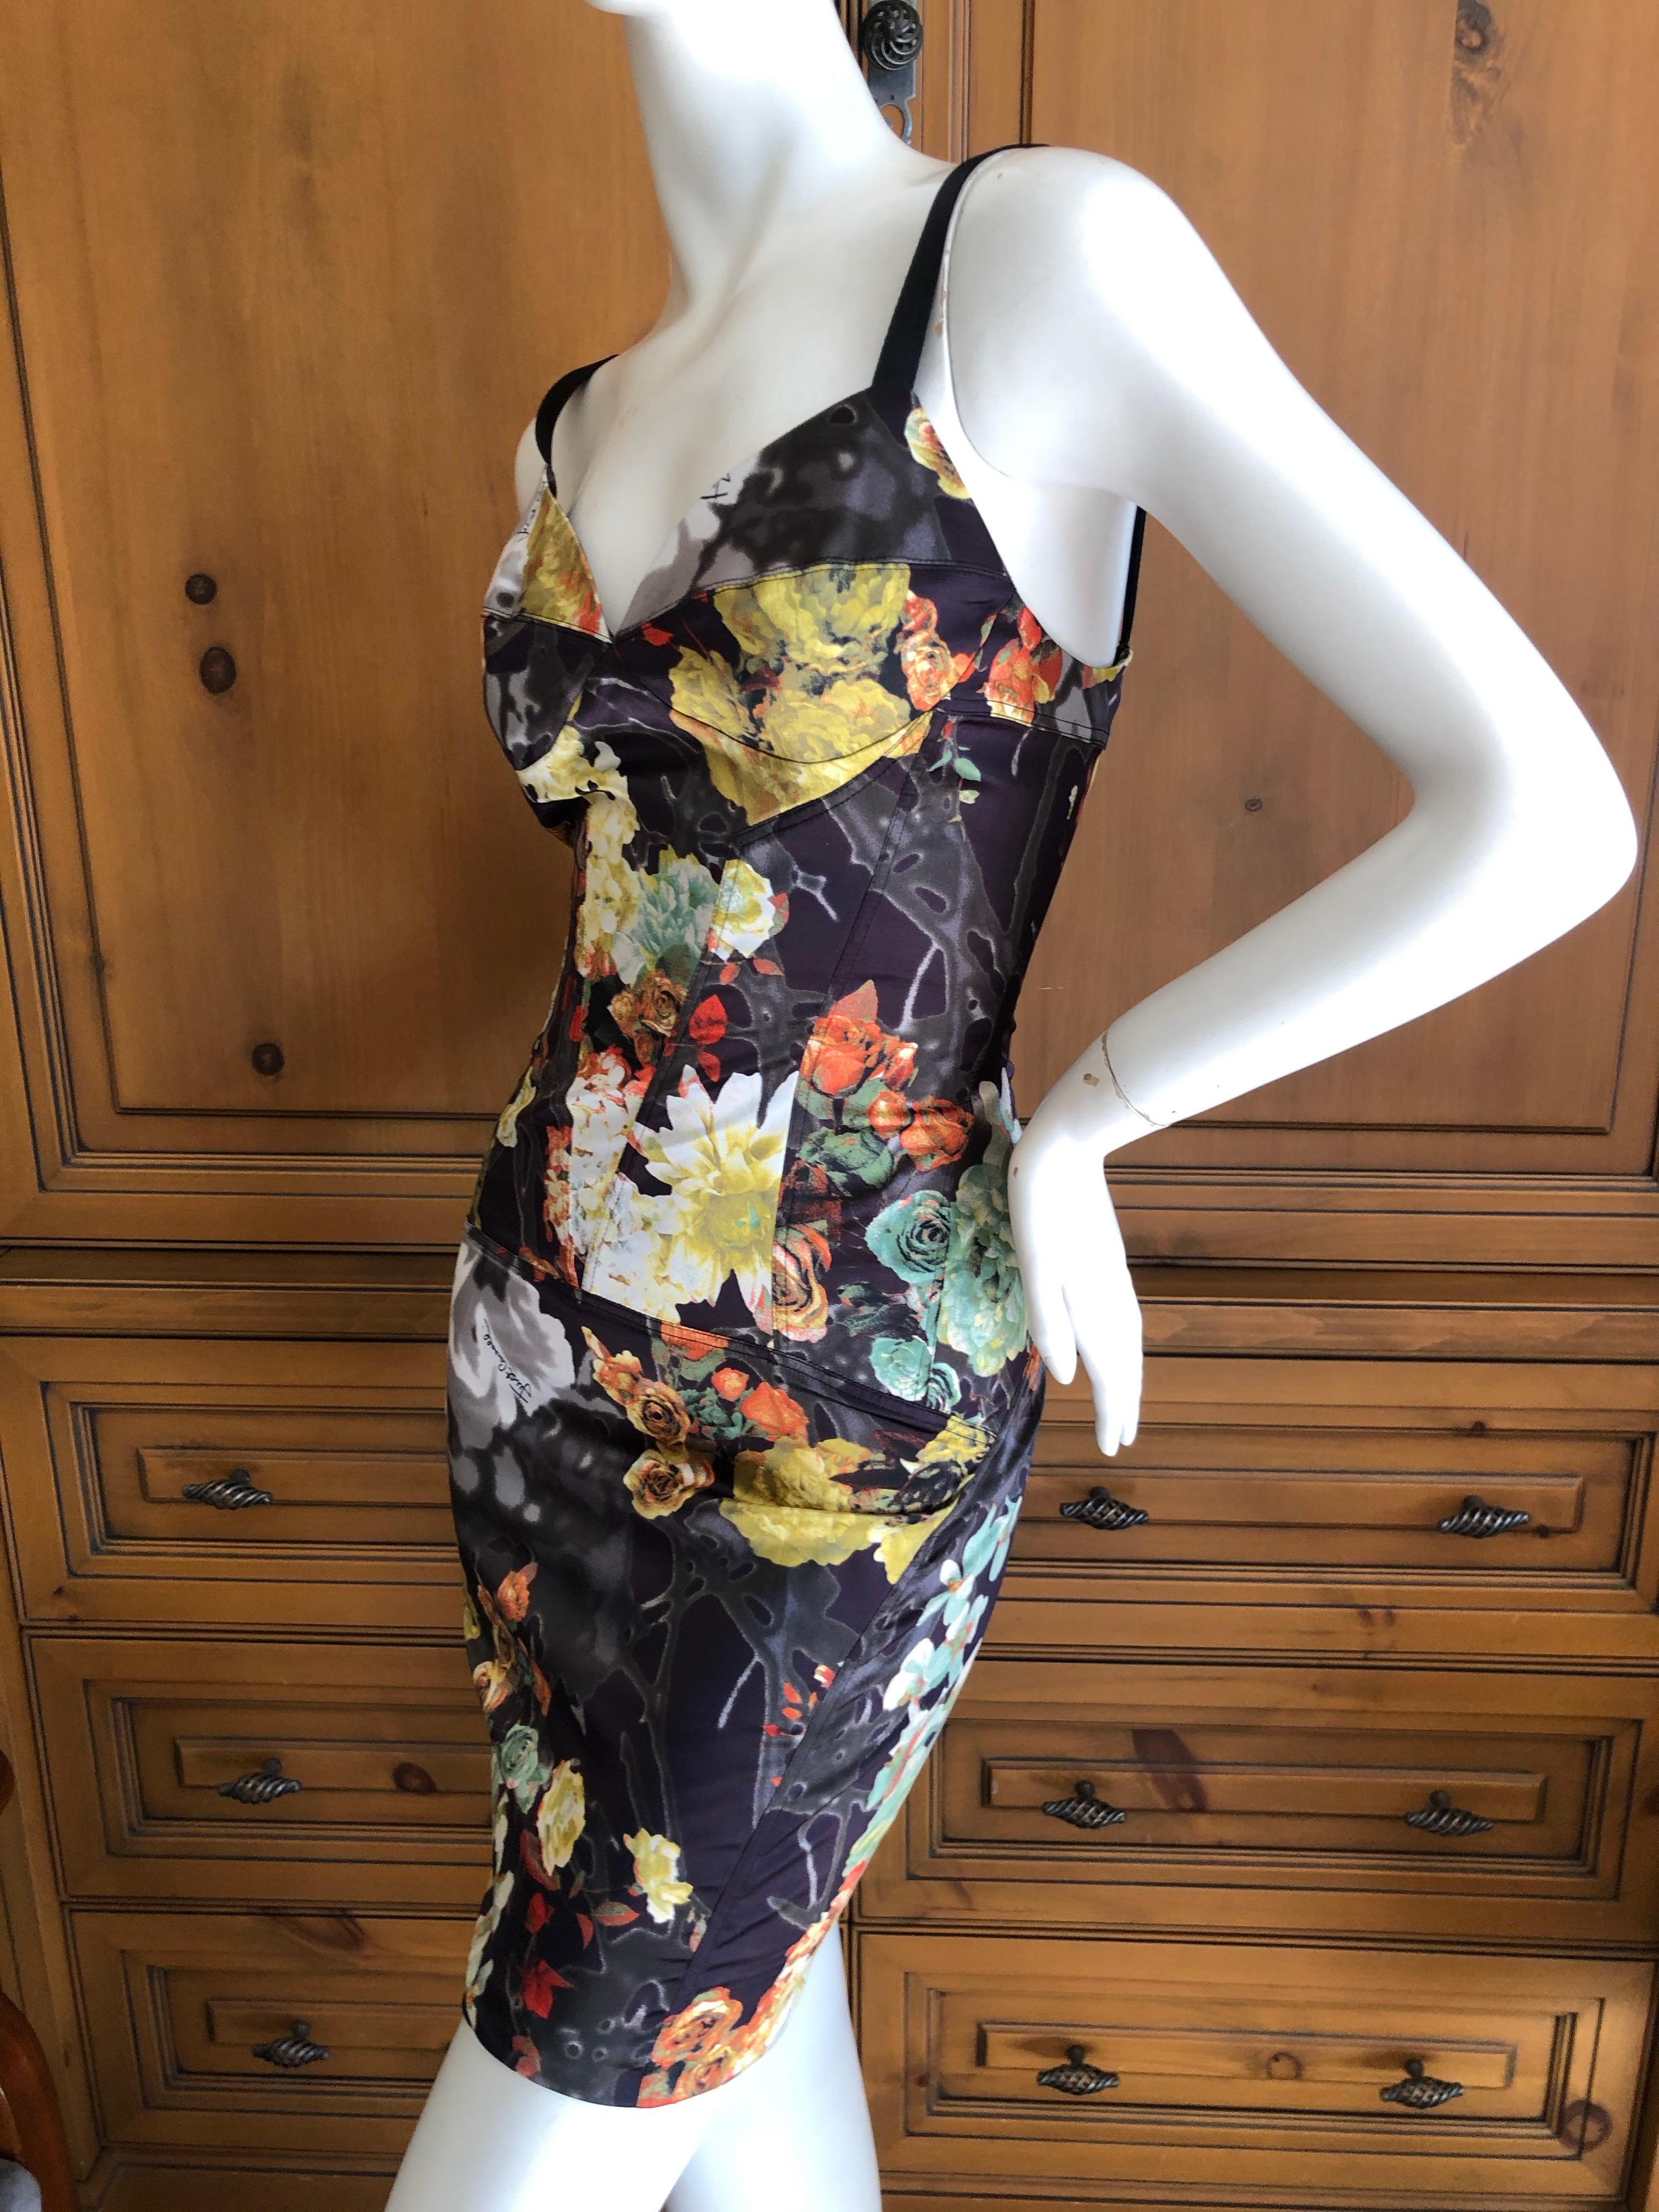 Roberto Cavalli for Just Cavalli Floral Dress with Corset Like Details For Sale 2